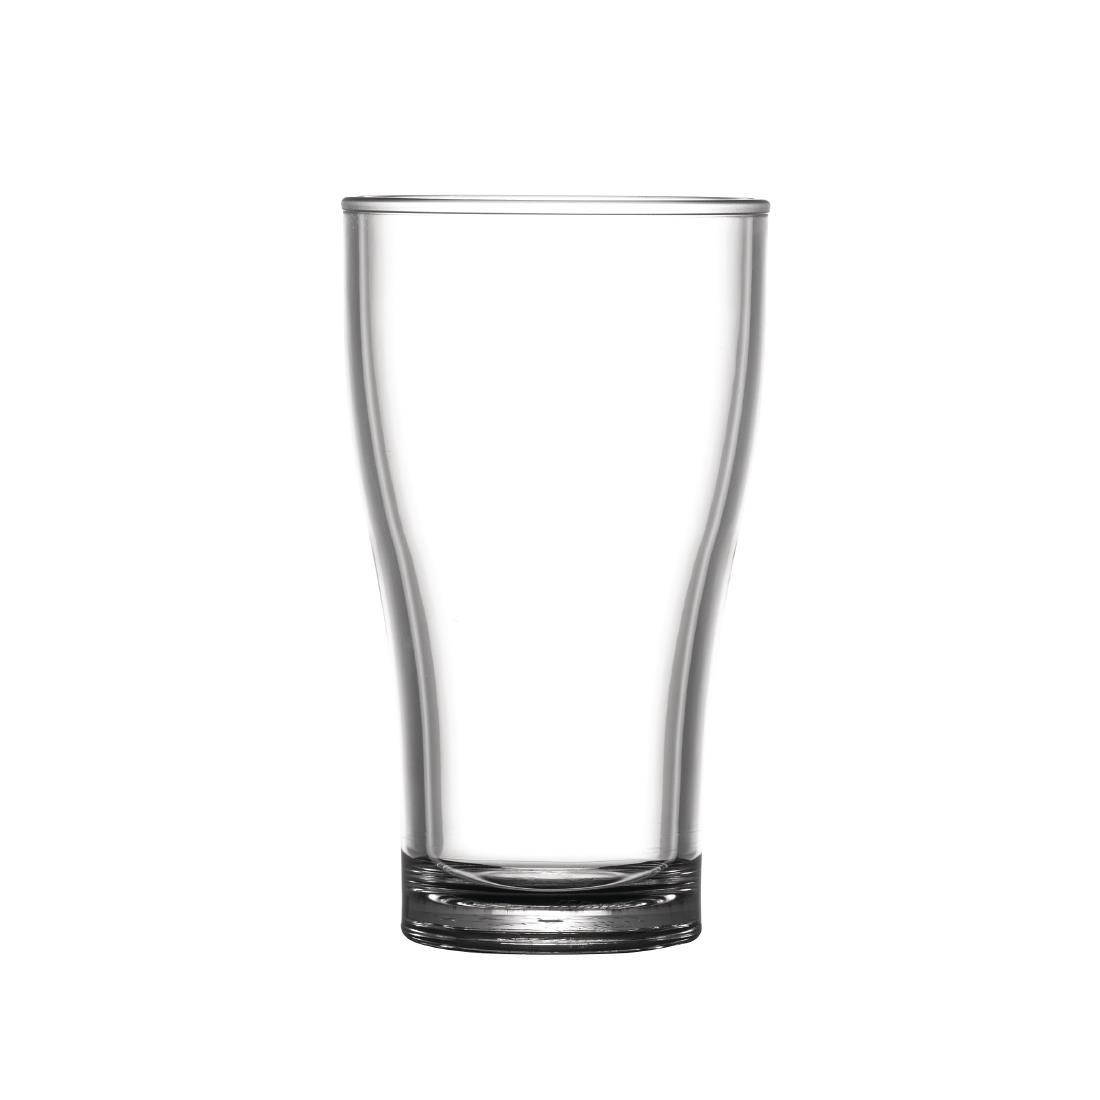 BBP Polycarbonate Nucleated Viking Half Pint Glasses CE Marked (Pack of 36) - DC420  - 1